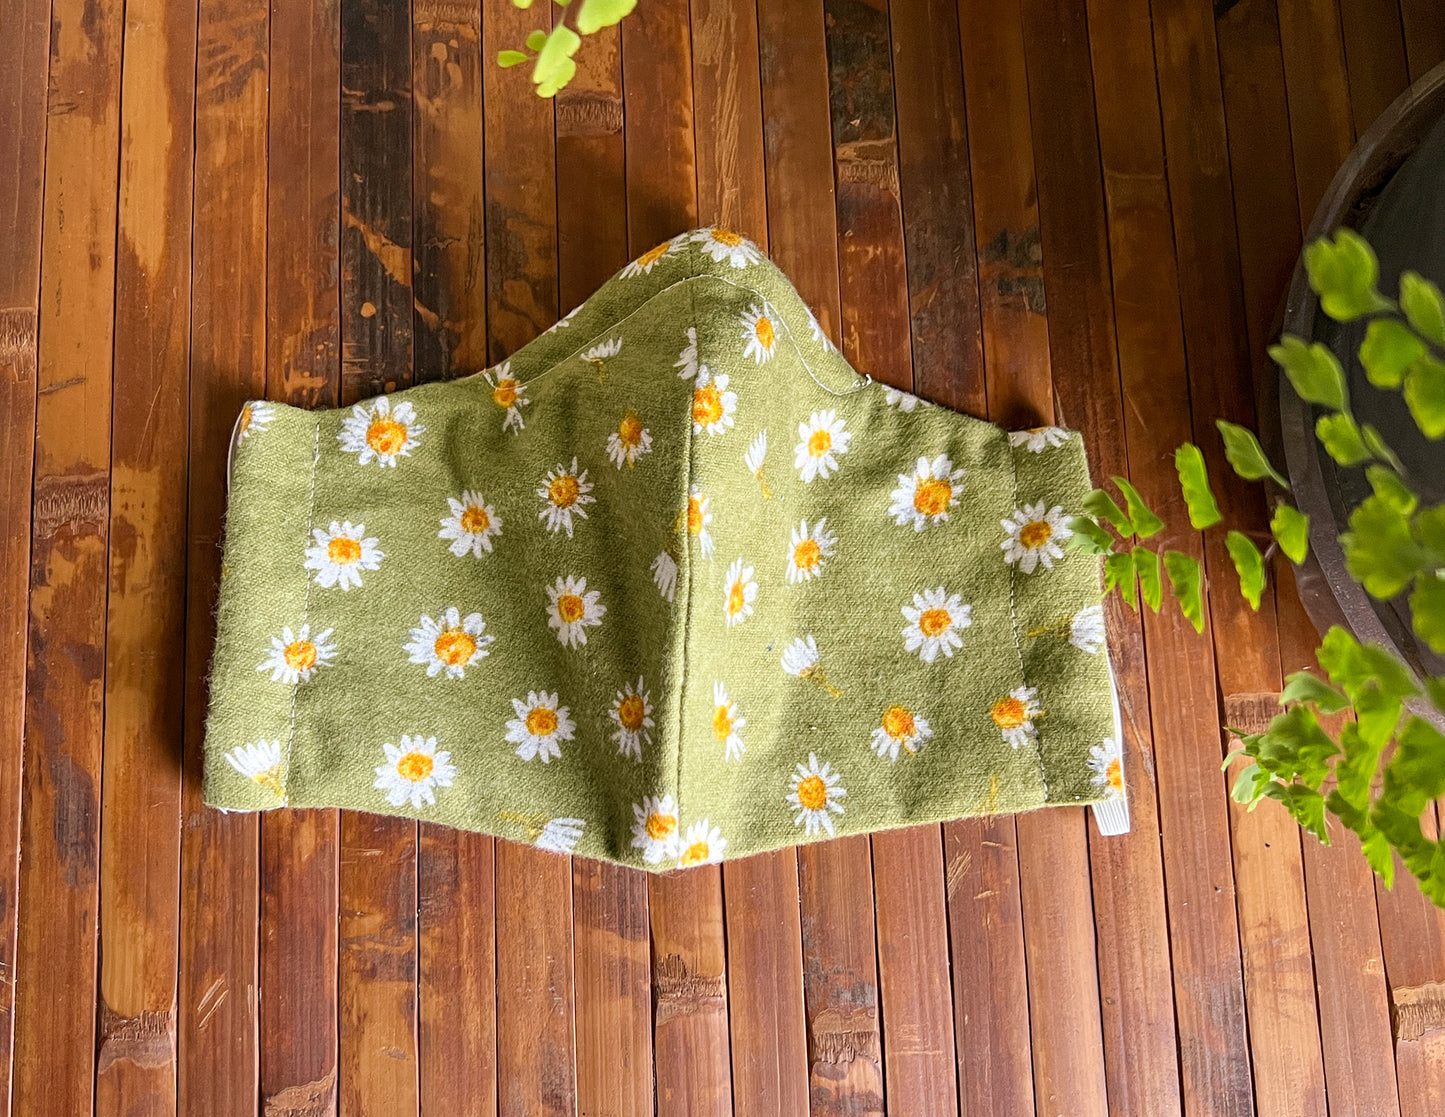 Floral Flannel Face Mask | Green Daisy Flowers Flannel Cotton Dust Covering | Fitted Washable Reusable Handmade | Nose Wire Filter Pocket